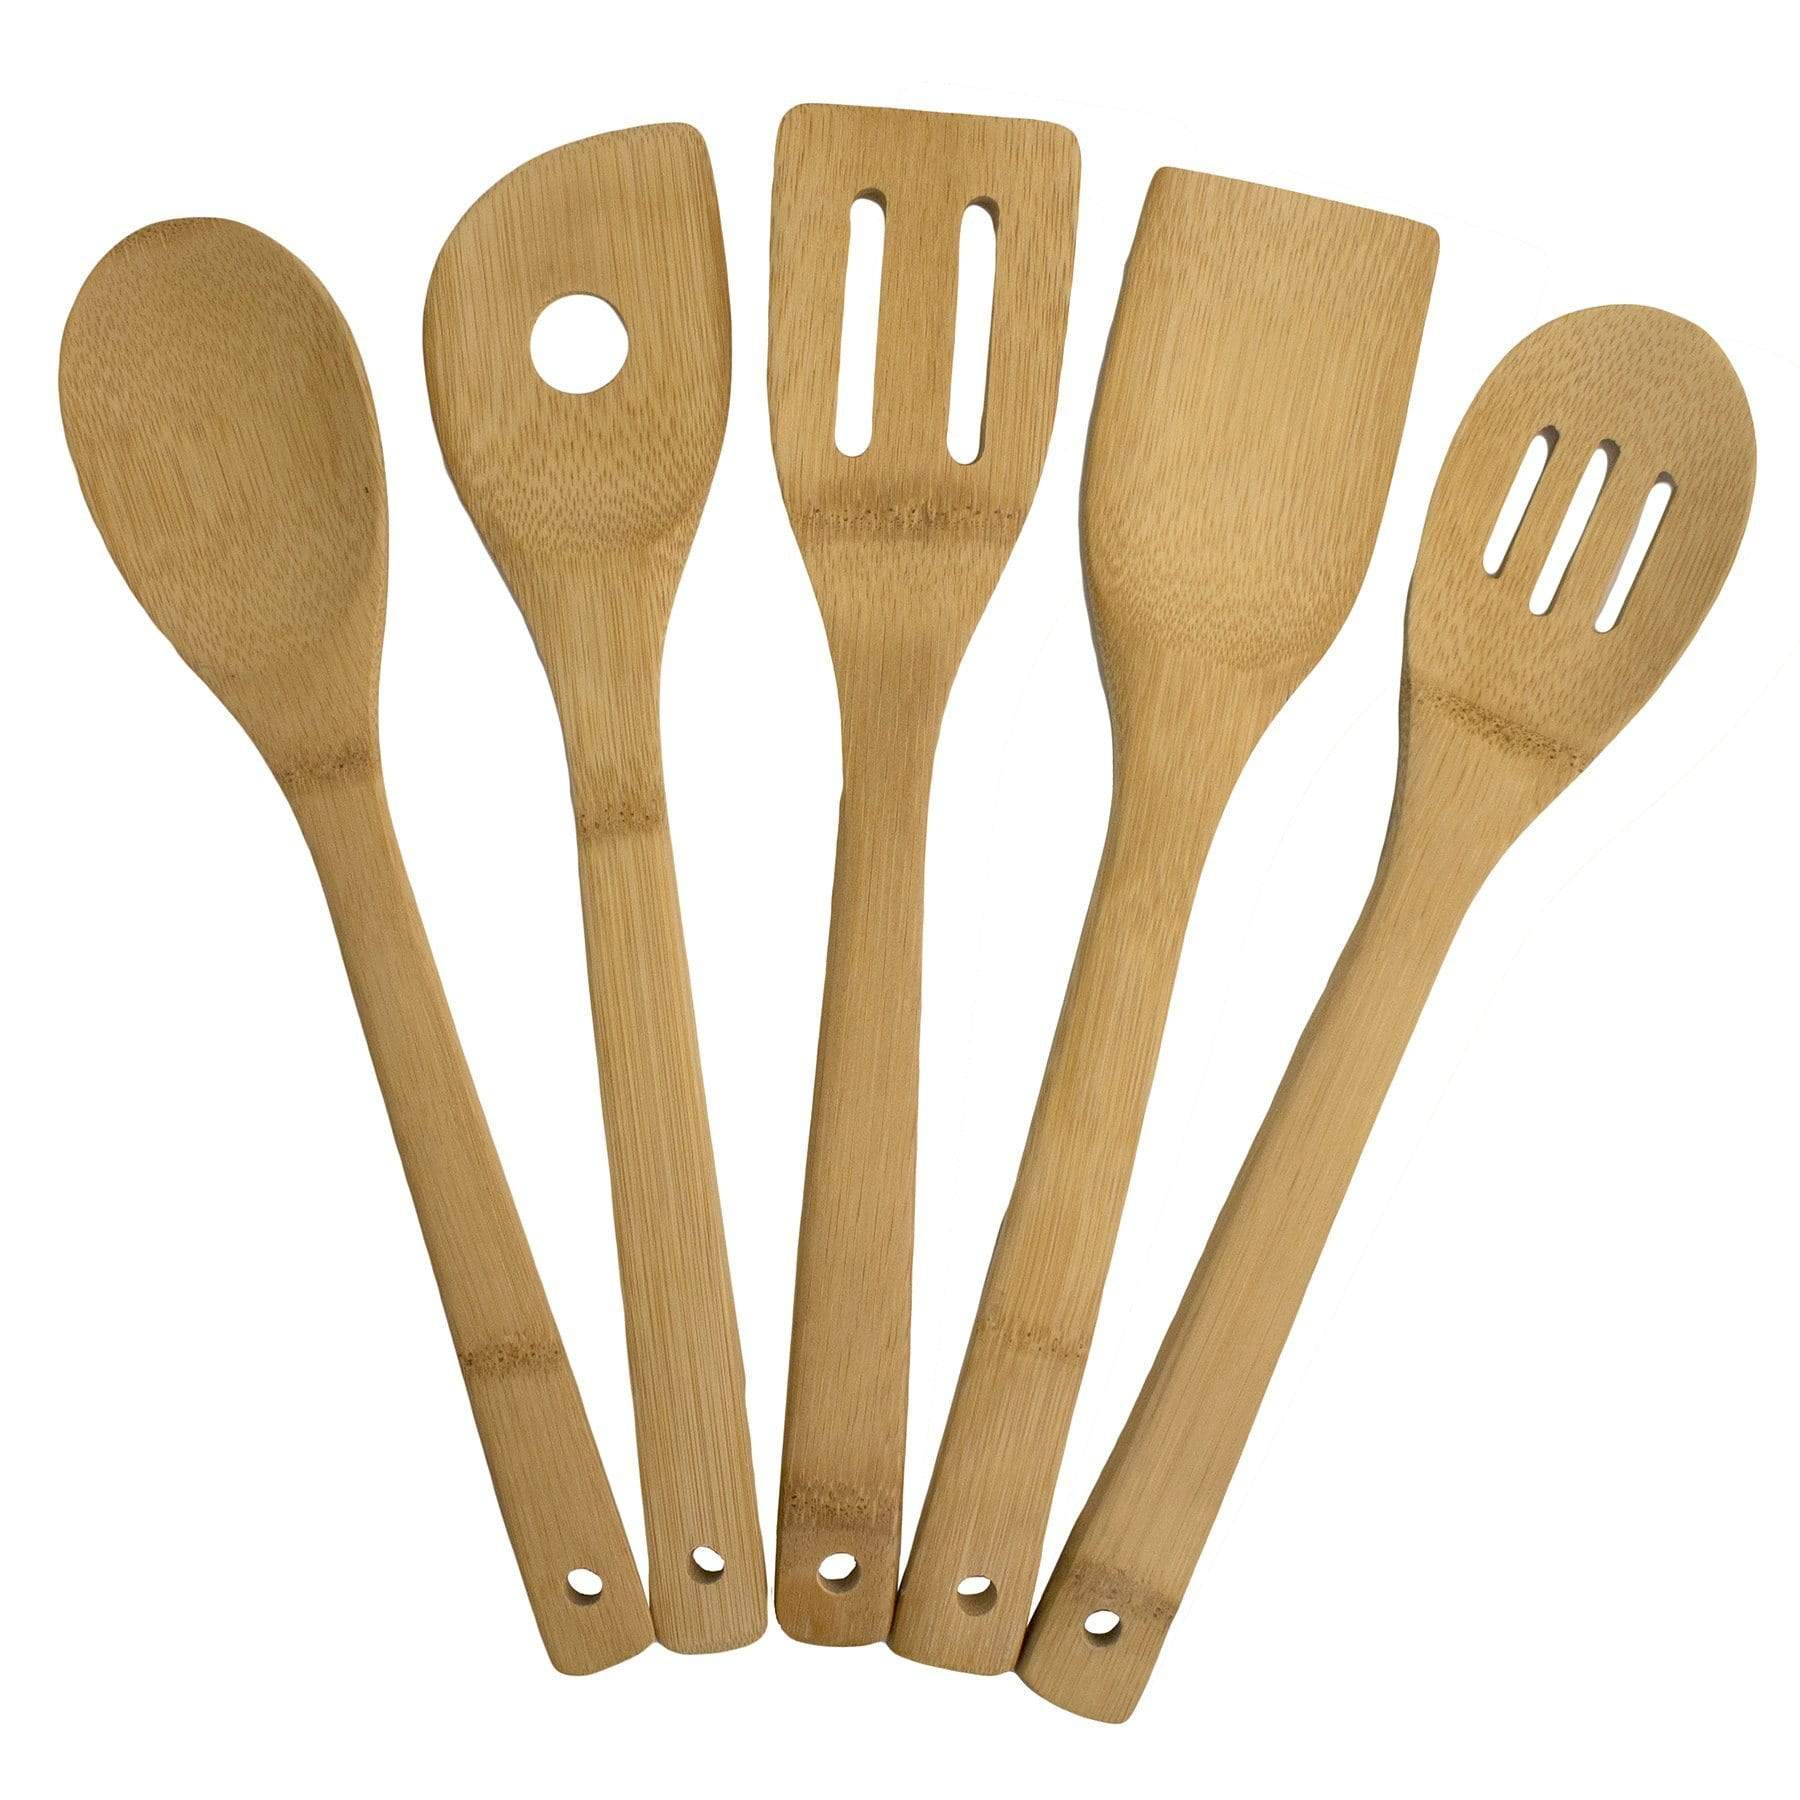 Totally Bamboo 5-Piece Bamboo Cooking Utensil Set